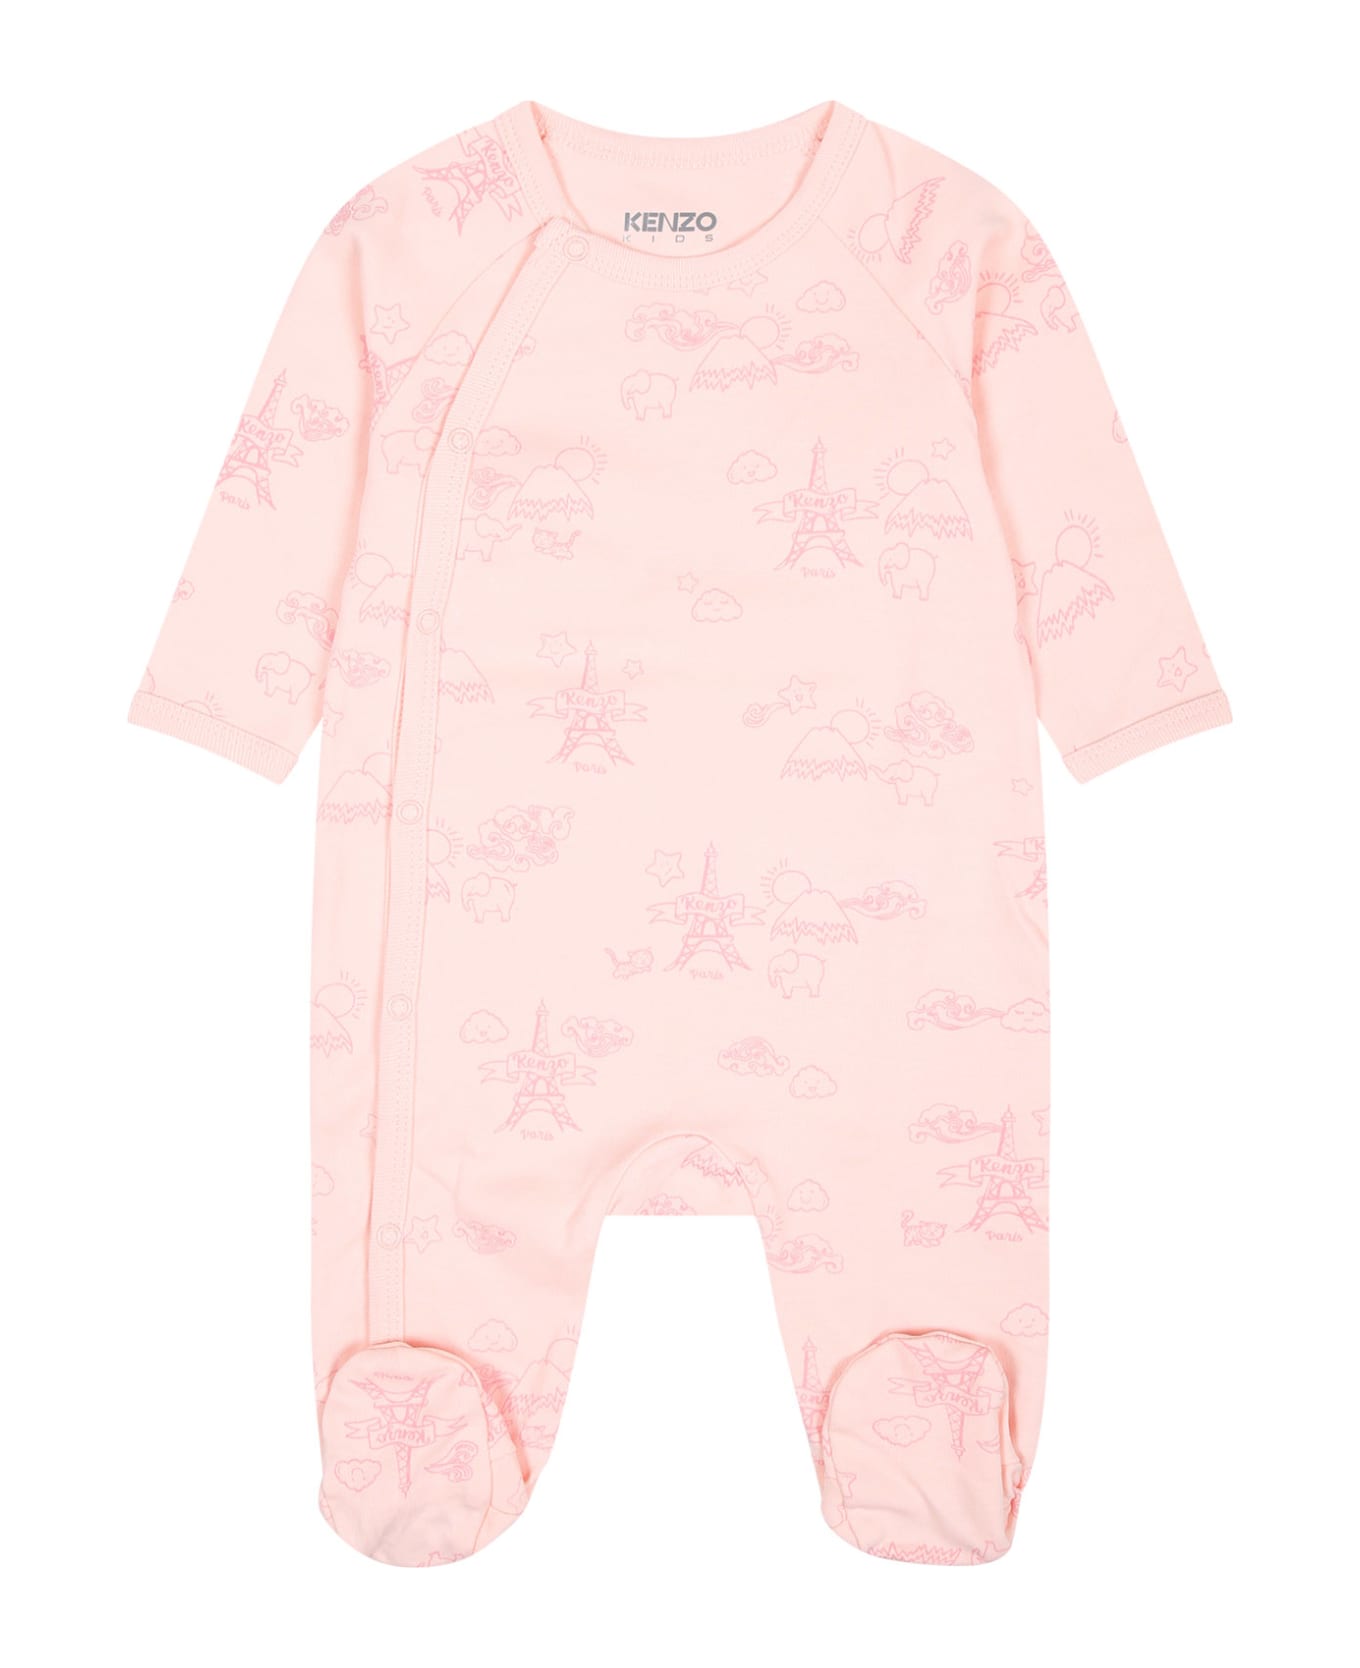 Kenzo Kids Pink Set For Baby Girl With Tour Eiffel And Print - Multicolor